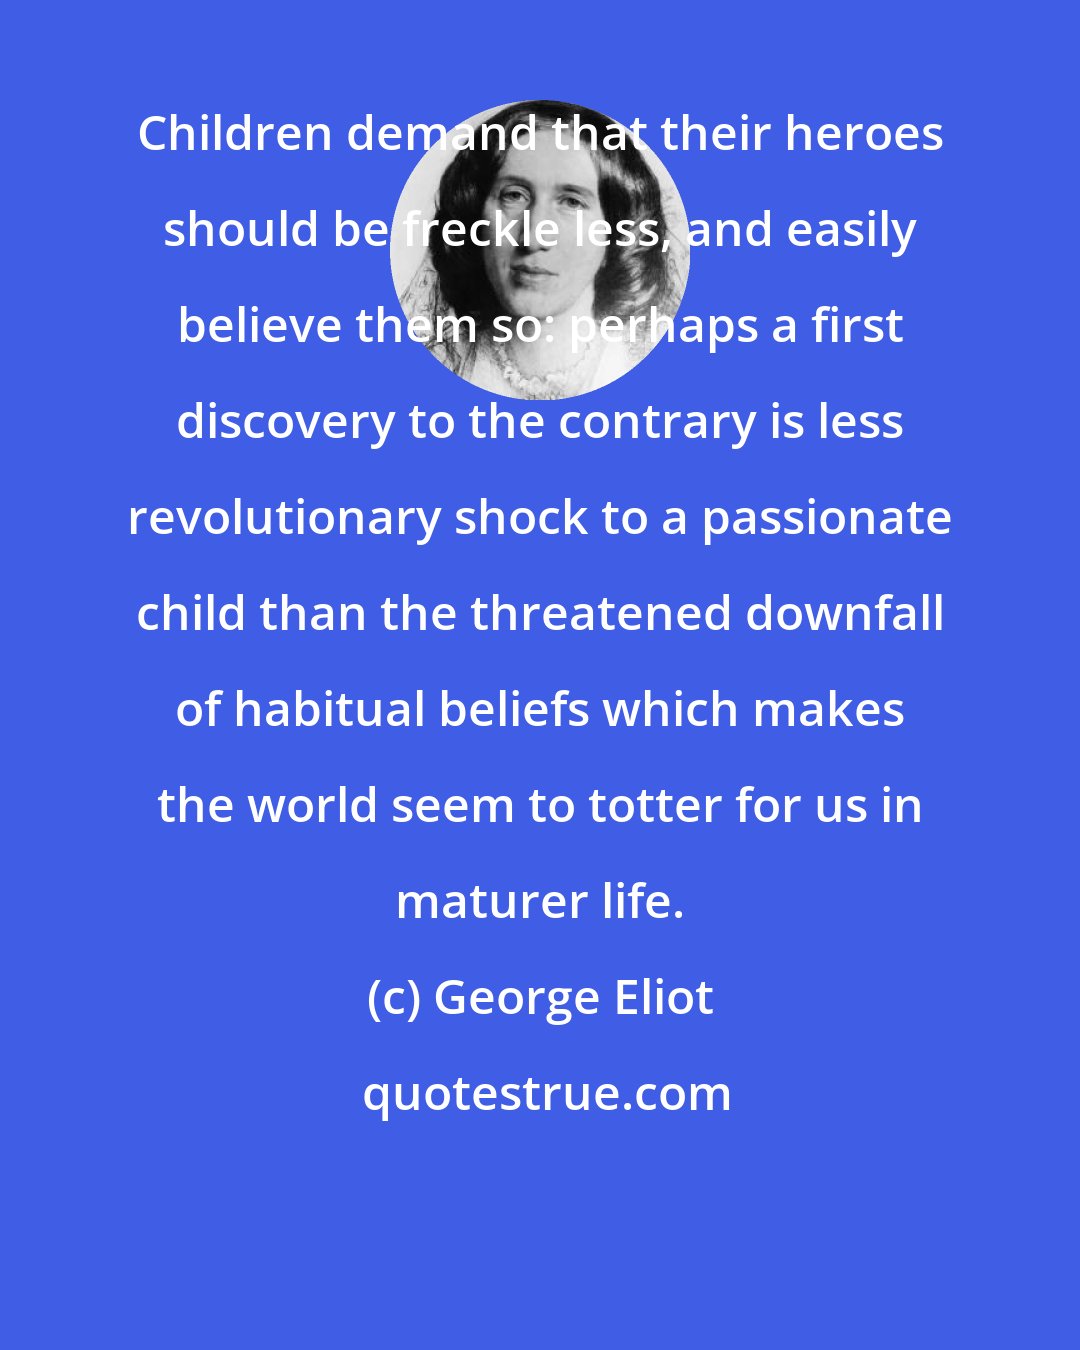 George Eliot: Children demand that their heroes should be freckle less, and easily believe them so: perhaps a first discovery to the contrary is less revolutionary shock to a passionate child than the threatened downfall of habitual beliefs which makes the world seem to totter for us in maturer life.